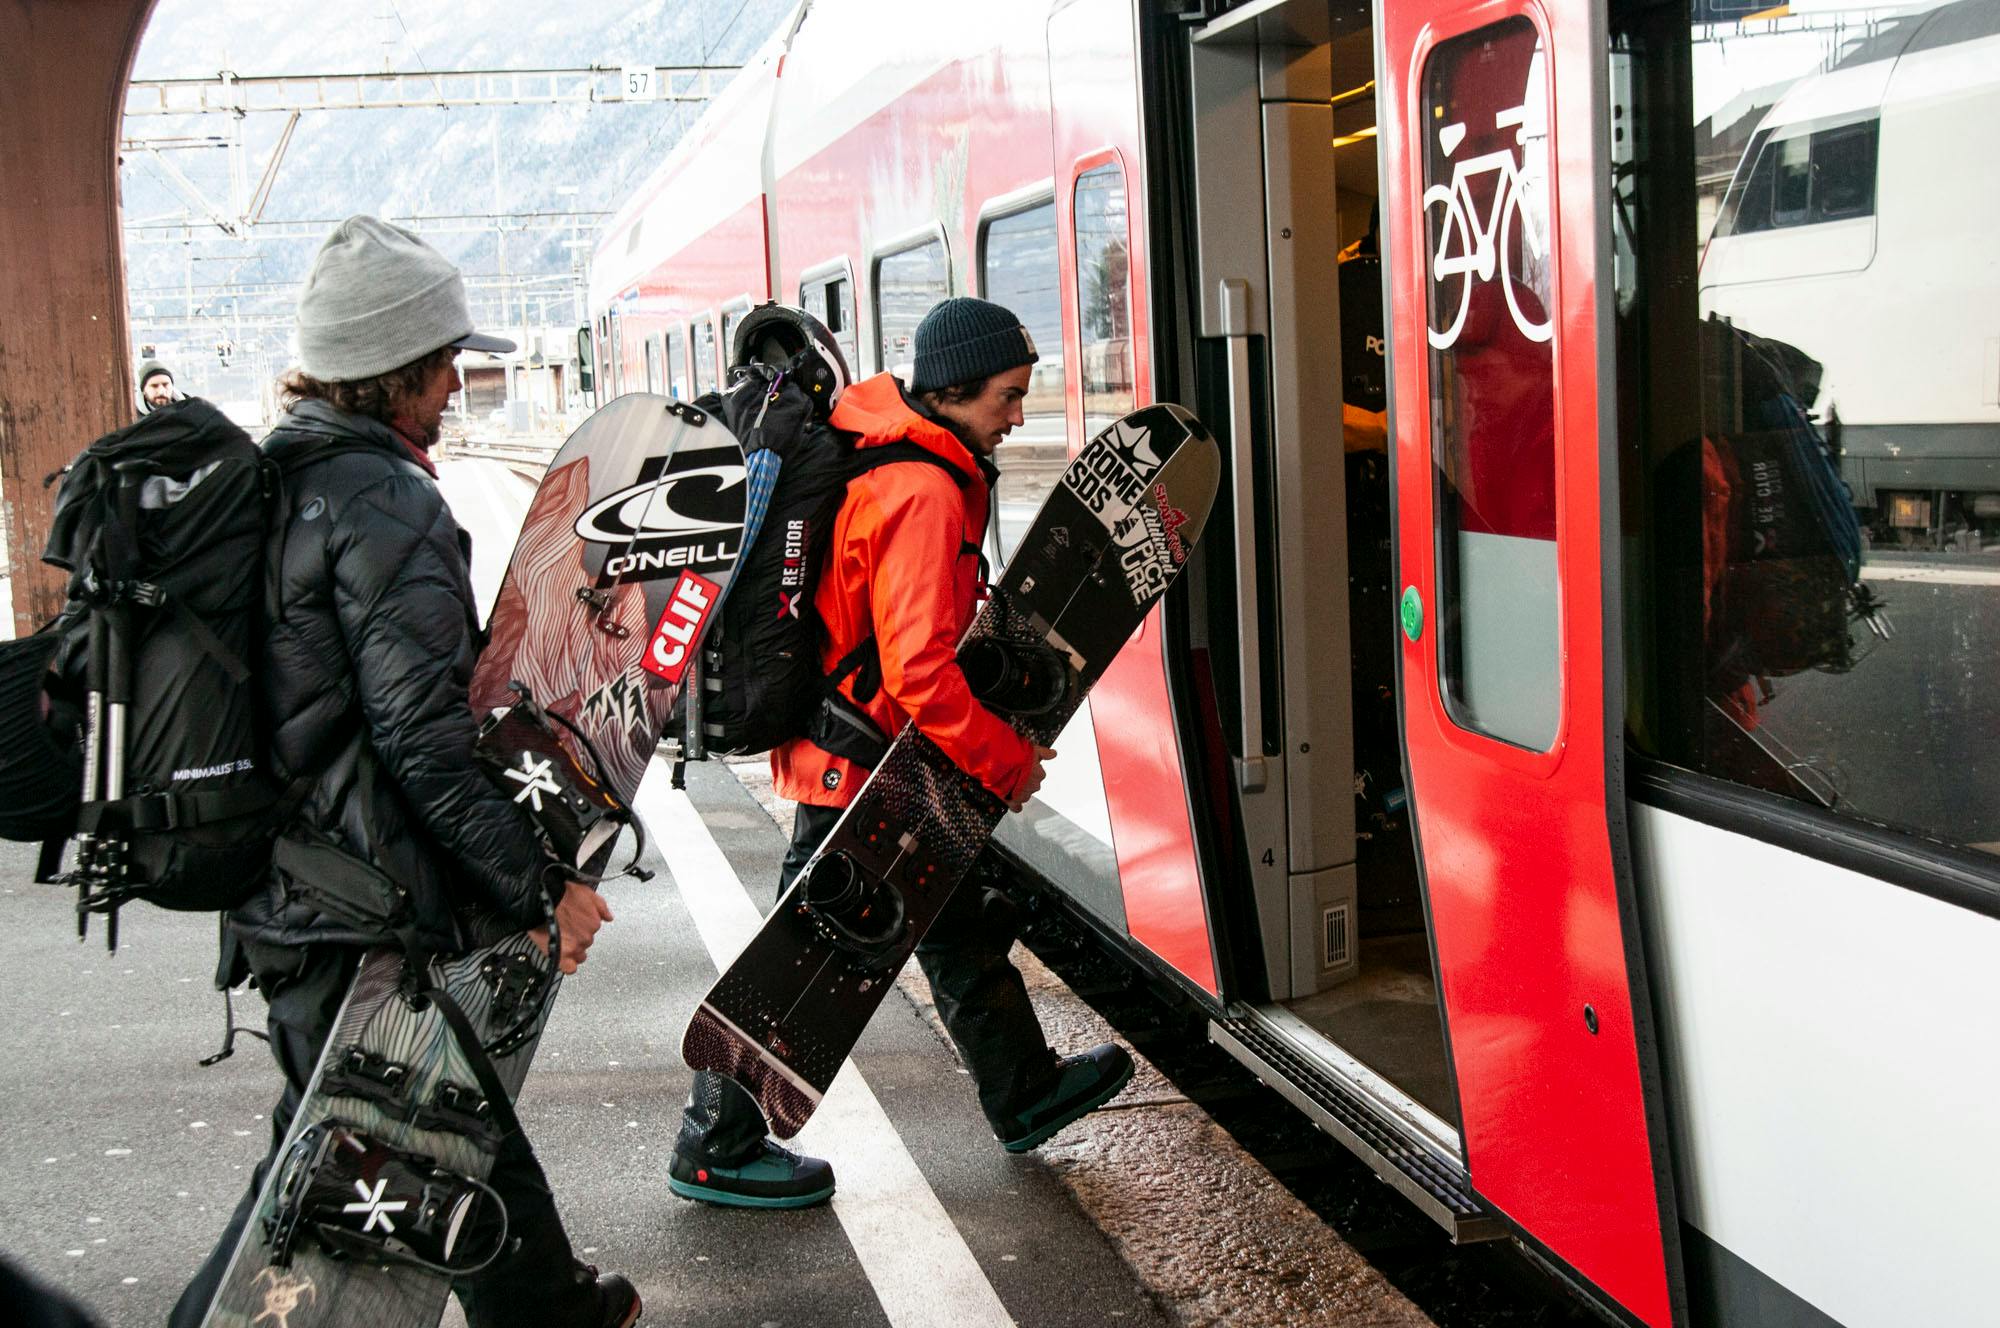 Two snowboarders carrying their boards and boarding a subway car